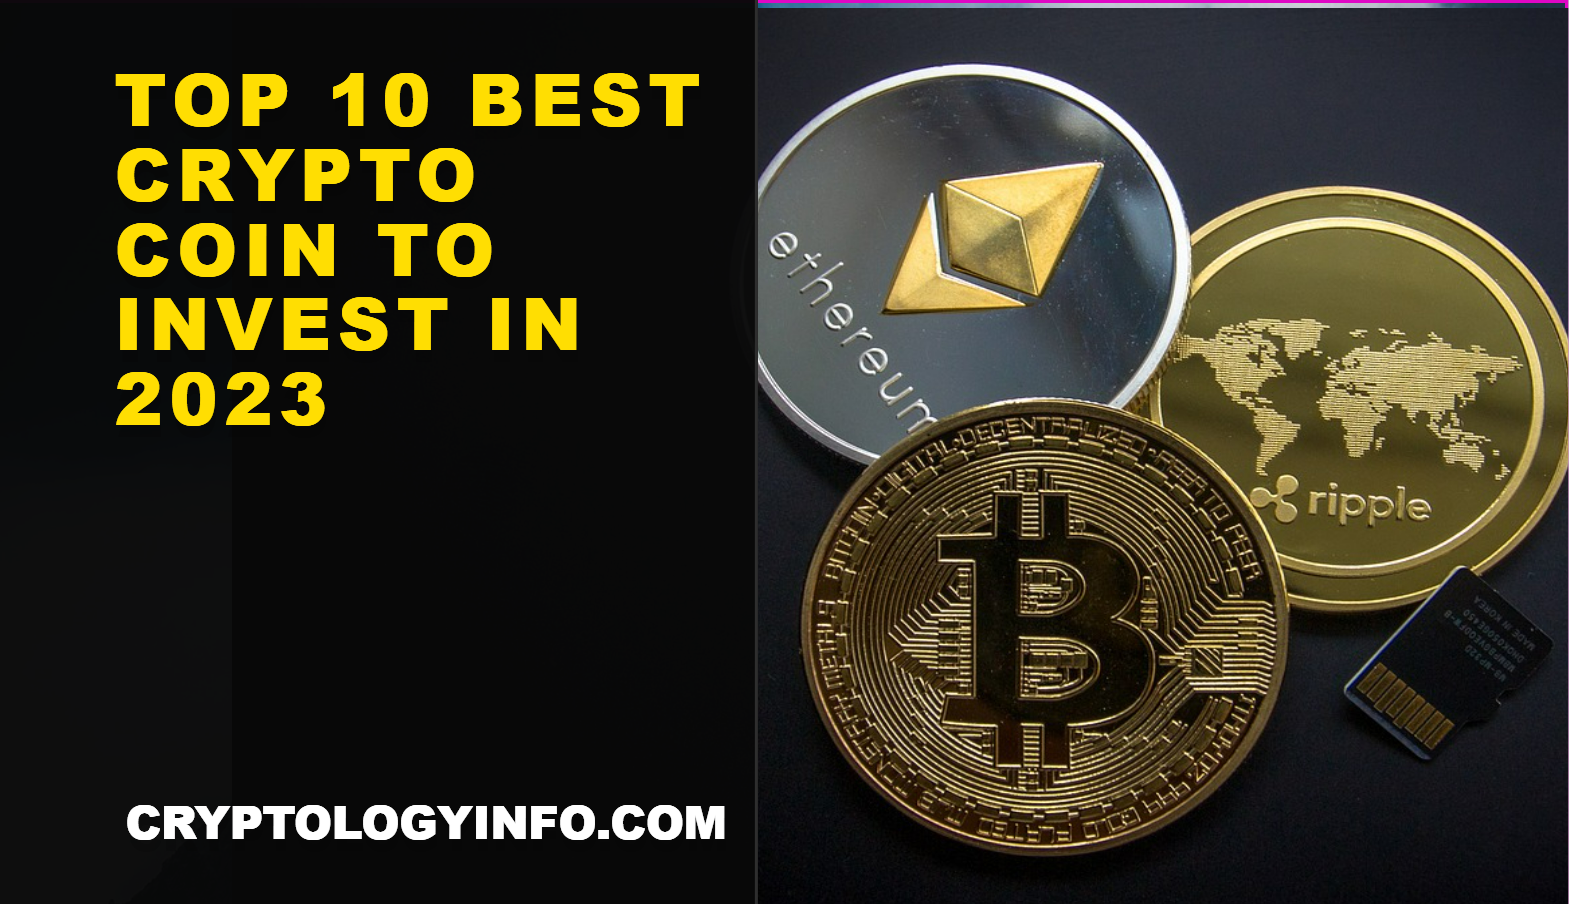 Top 10 Best Crypto Coin to Invest in 2023